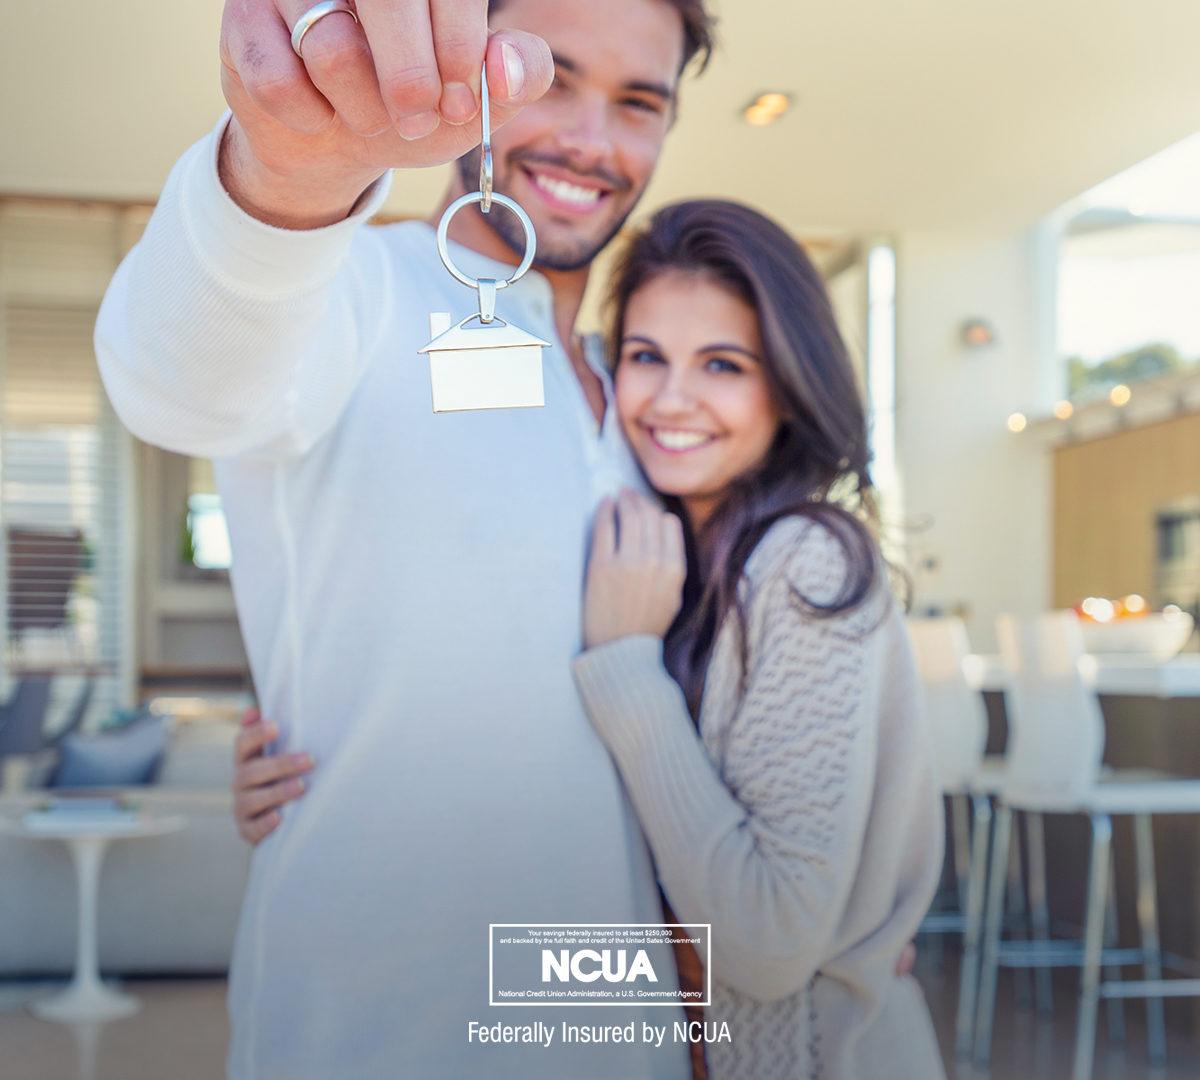 There are many types of home loans in Georgia that offer valuable benefits. In this image, a happy couple are holding the keys to their new home.